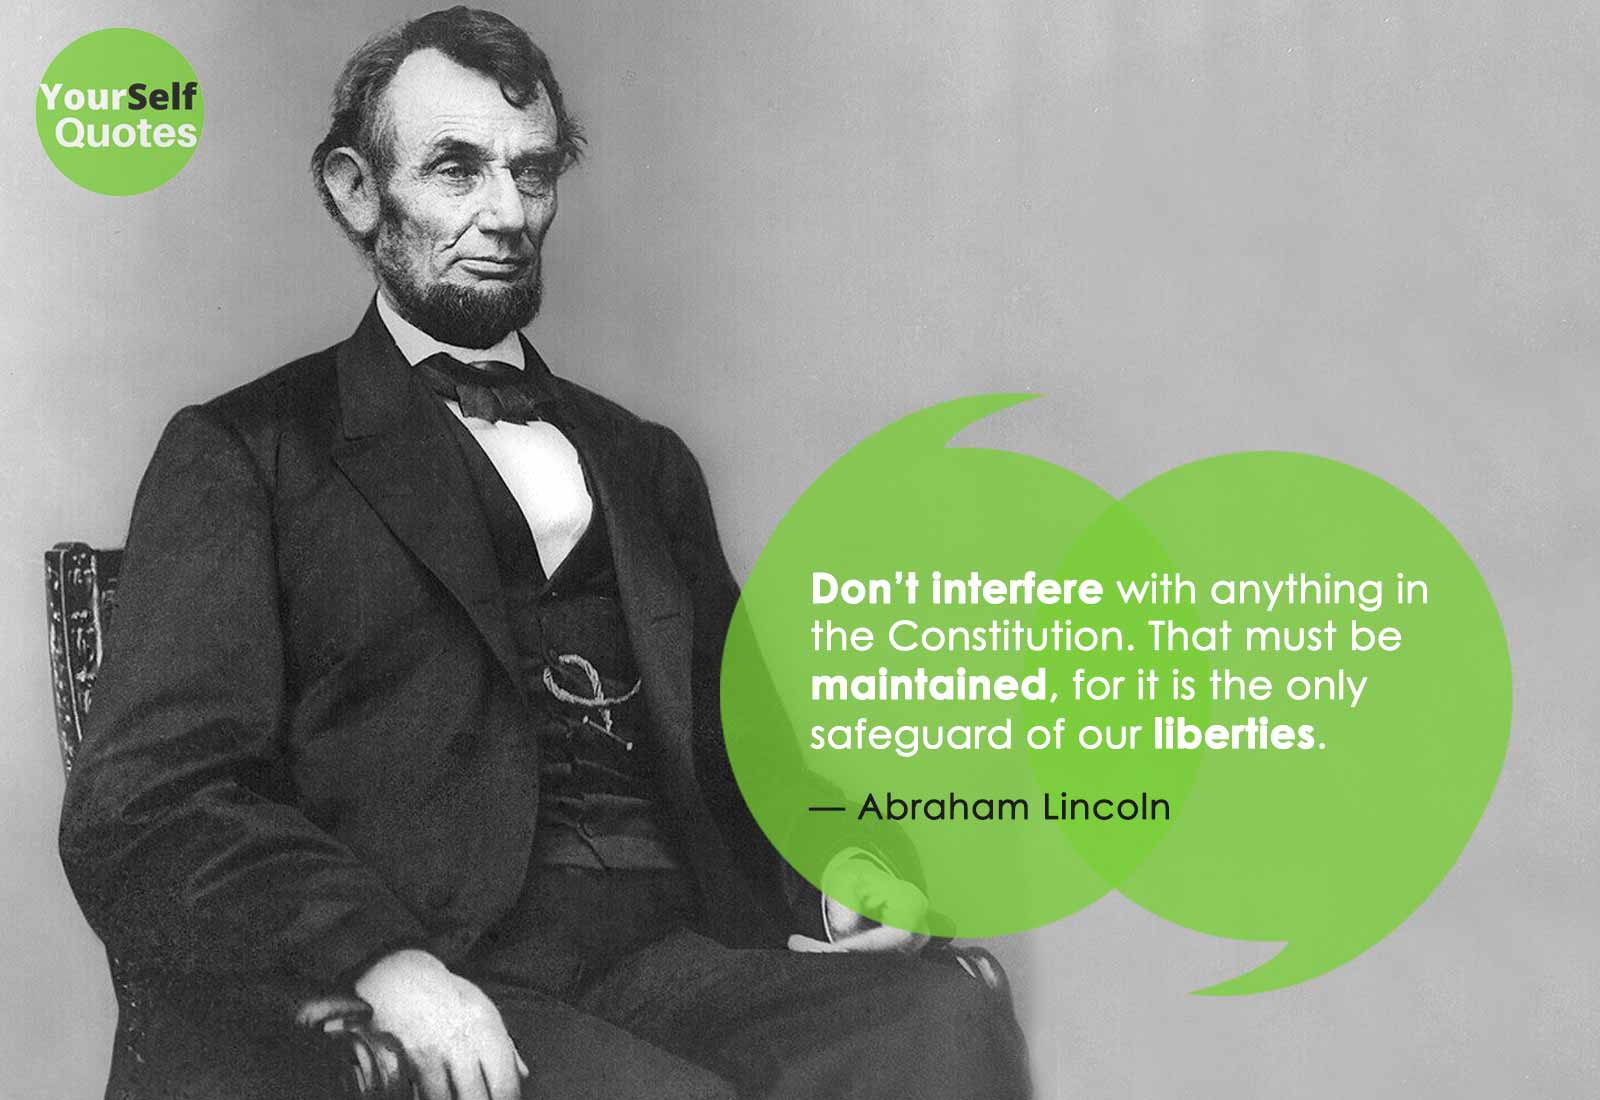 Abraham Lincoln Quotes On Life